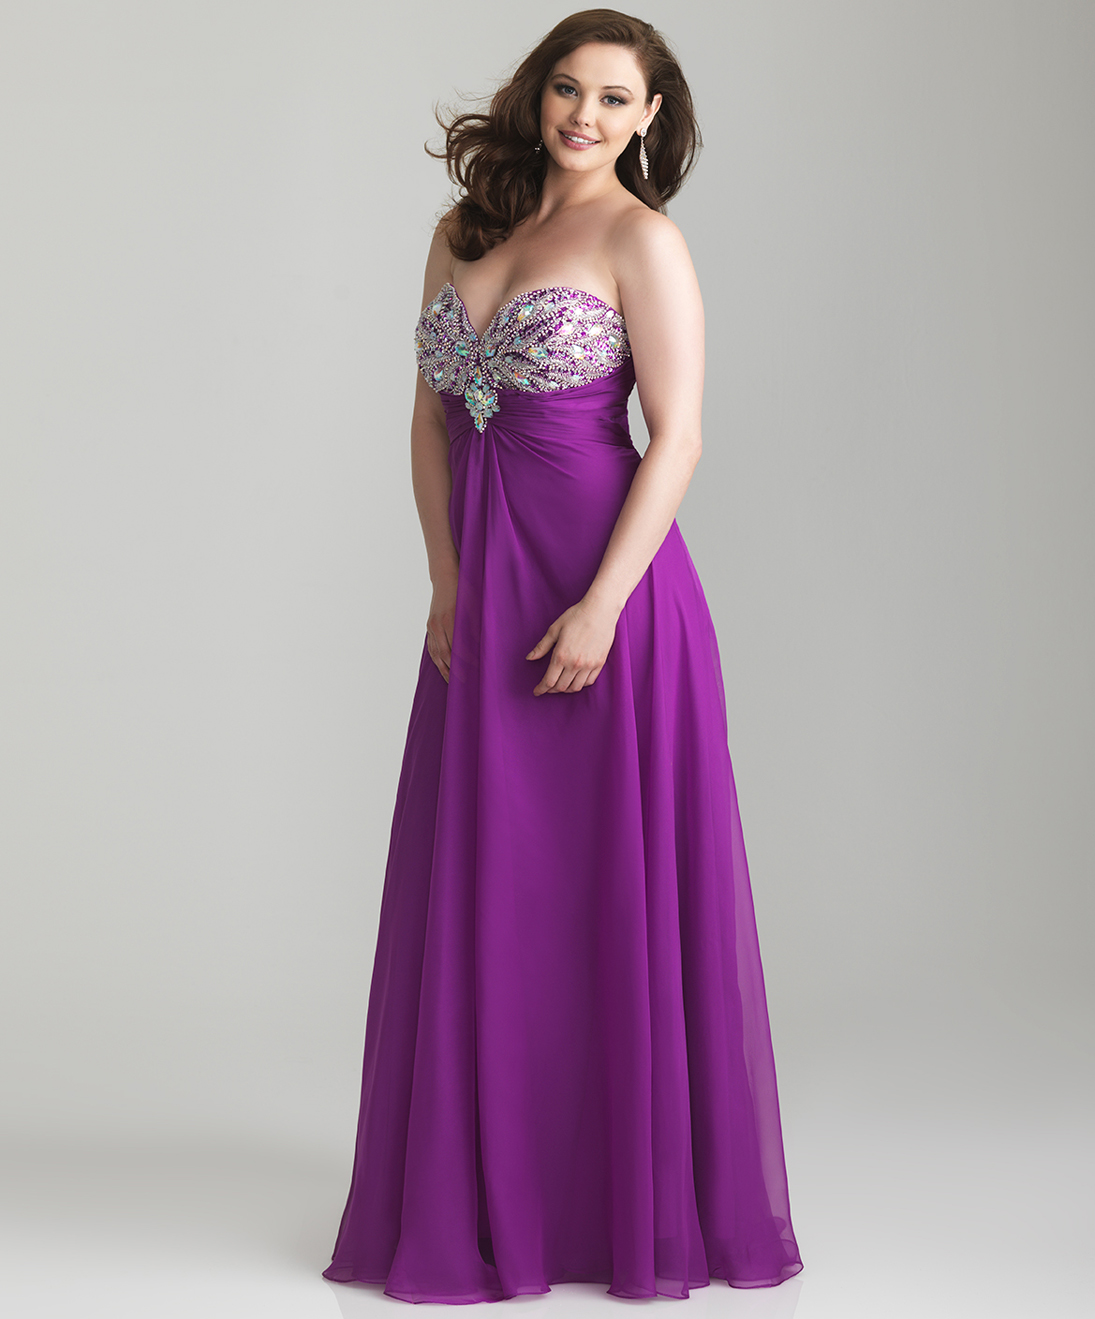 Plus Size Prom Dresses - Dressed Up Girl